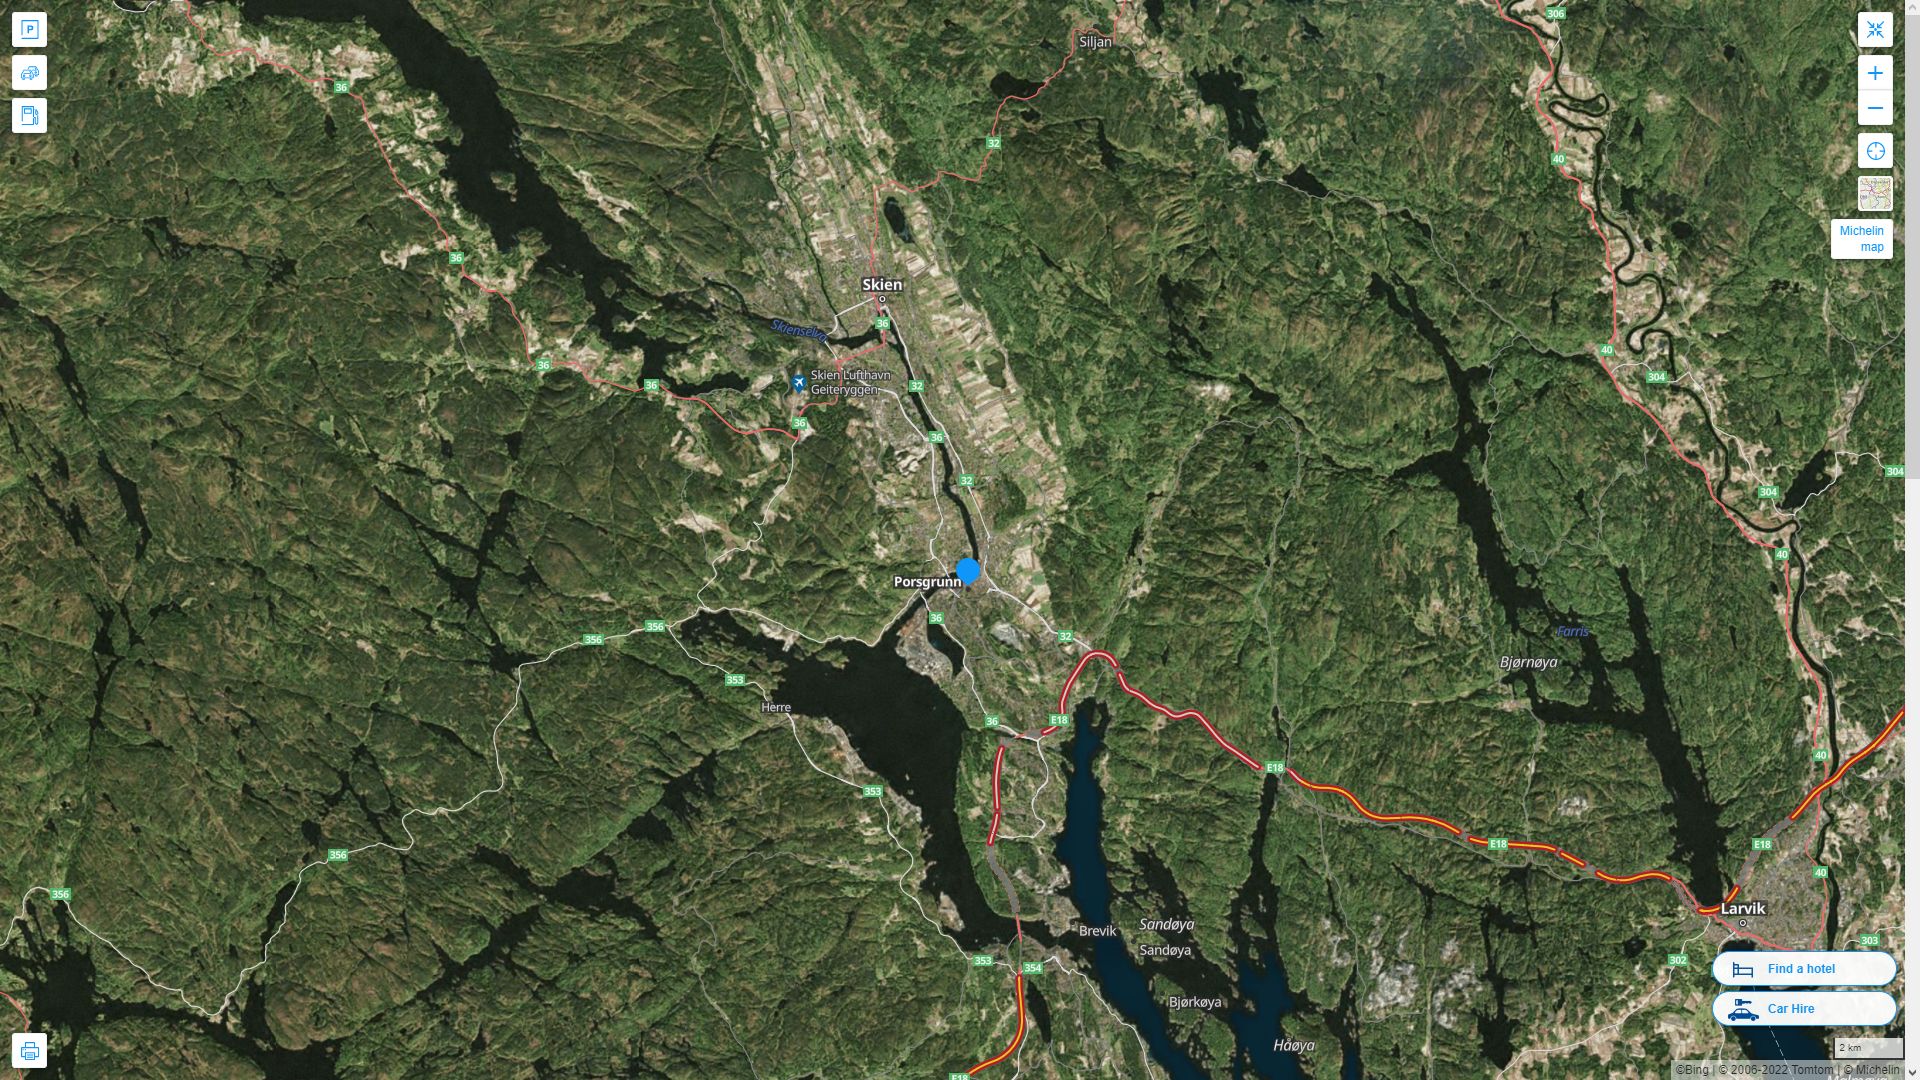 Porsgrunn Highway and Road Map with Satellite View